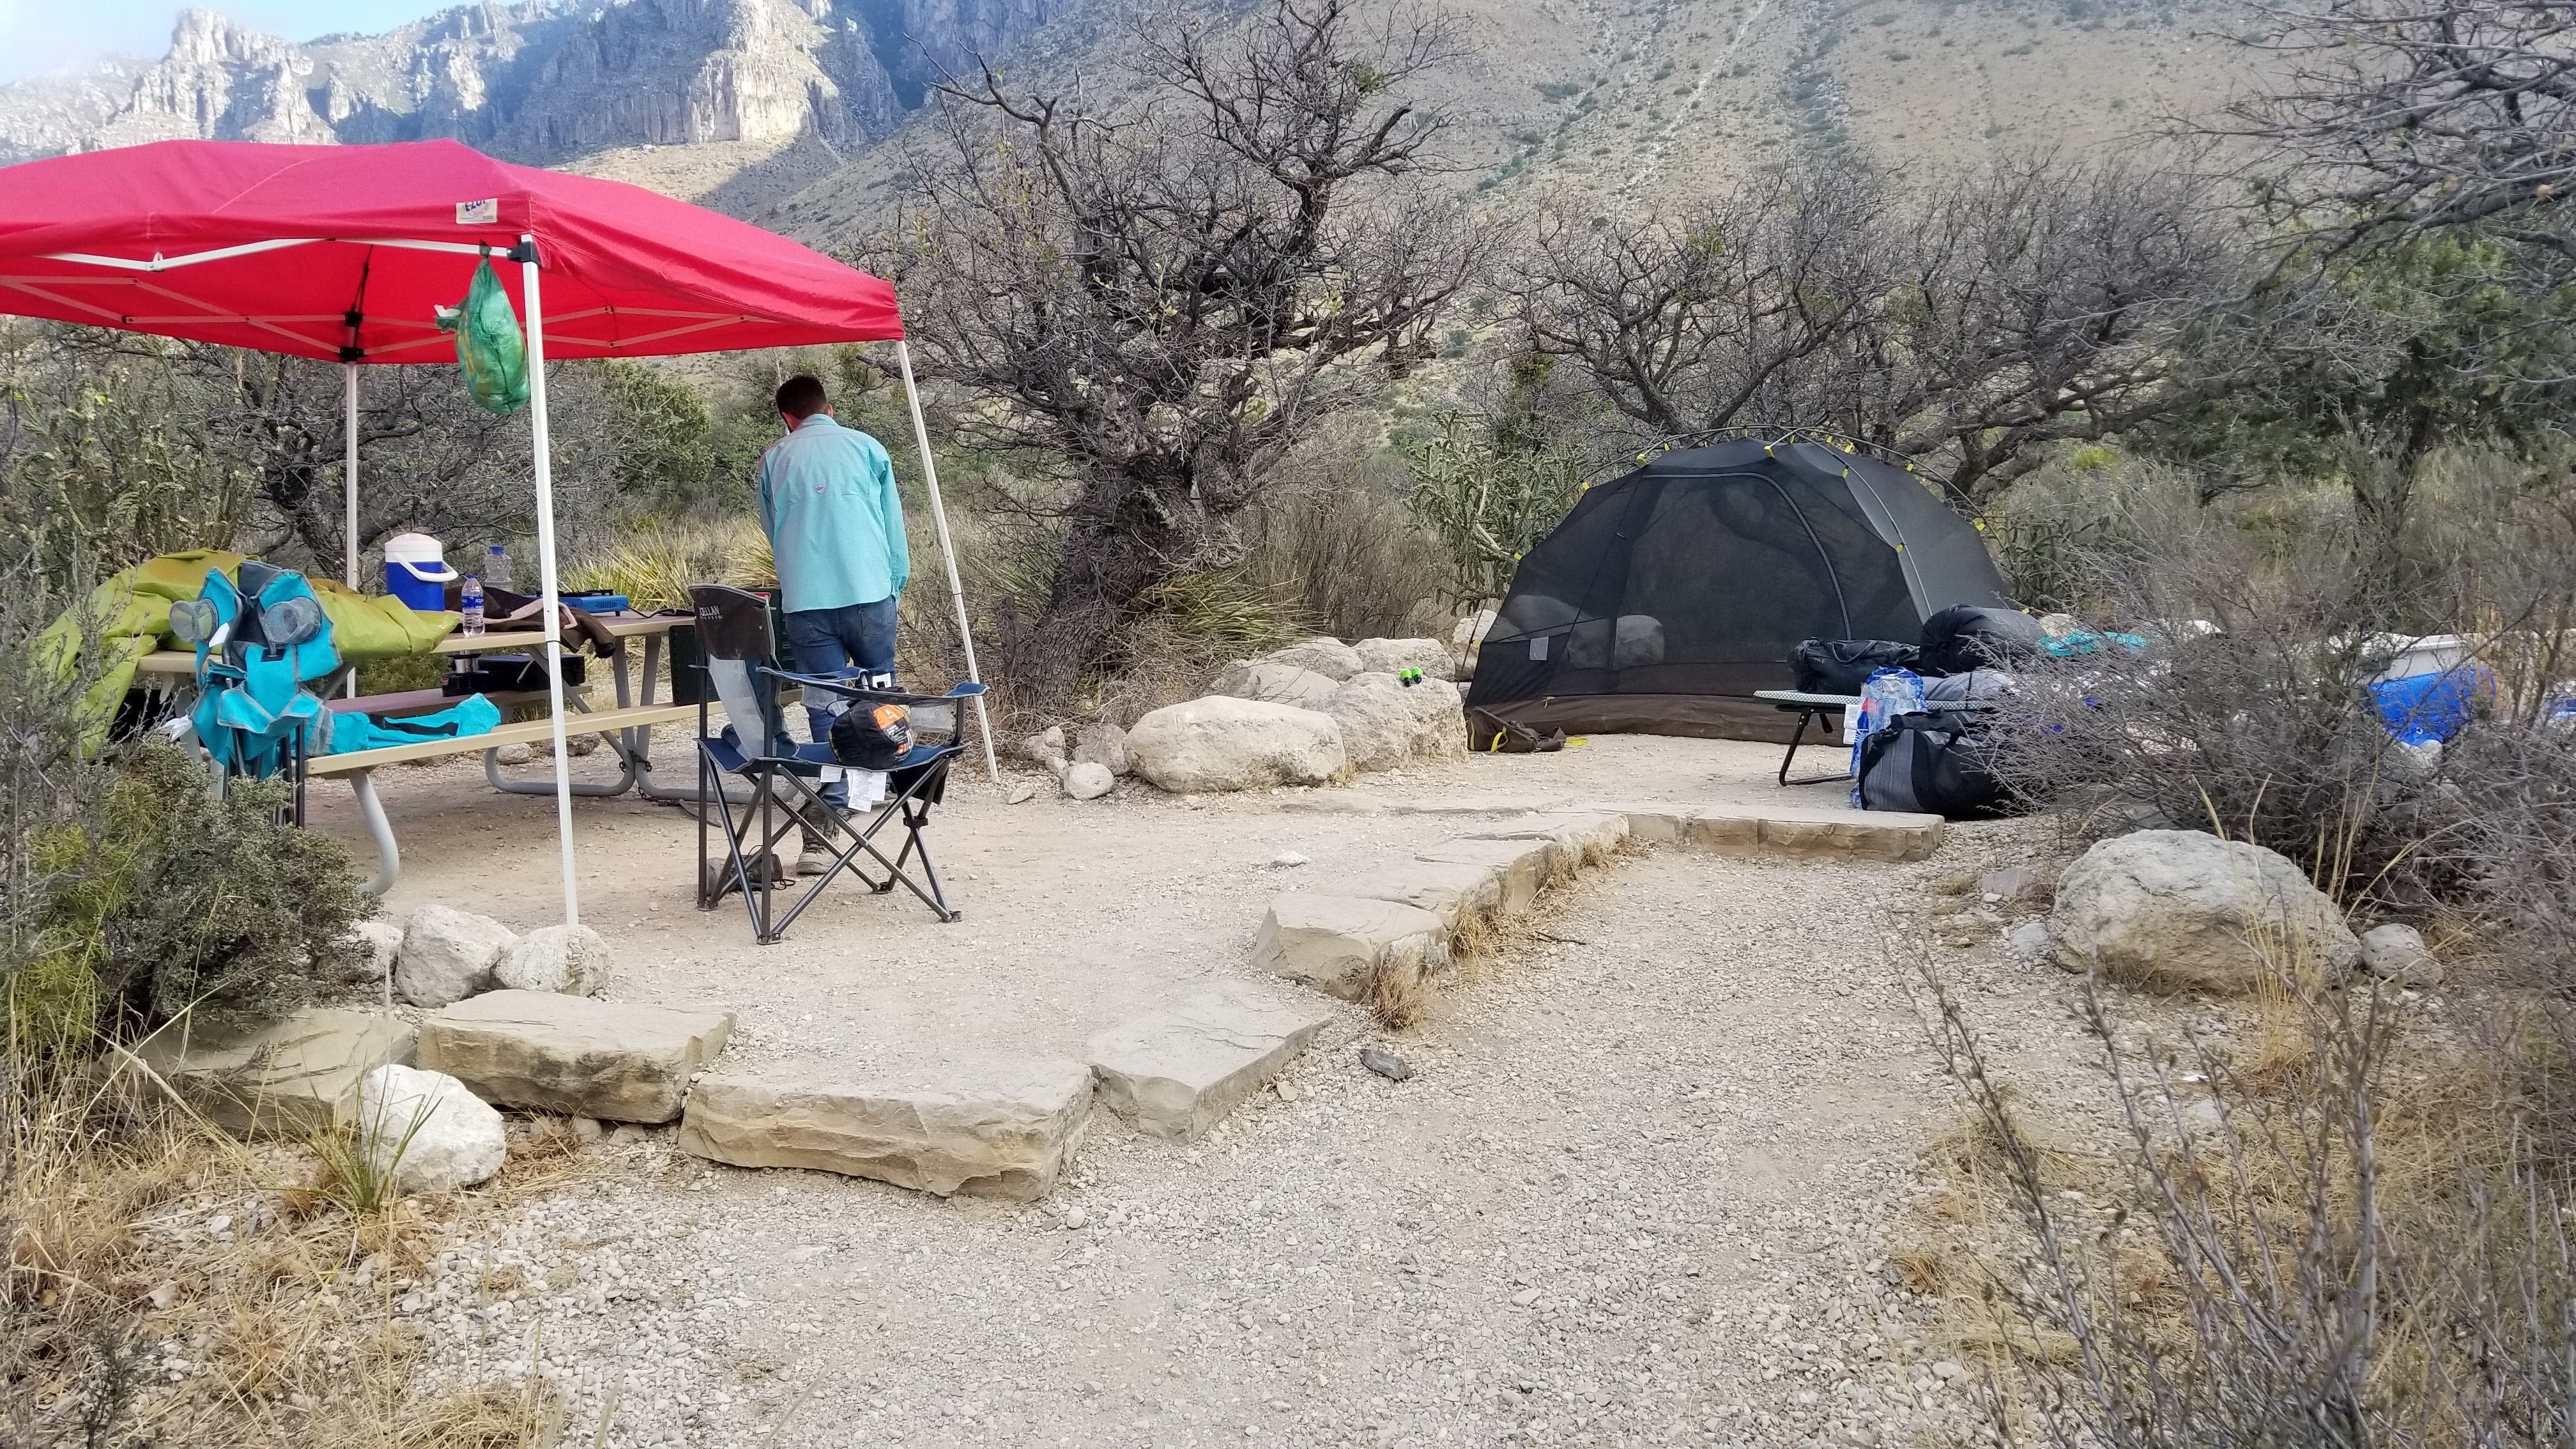 enough space for two small tents